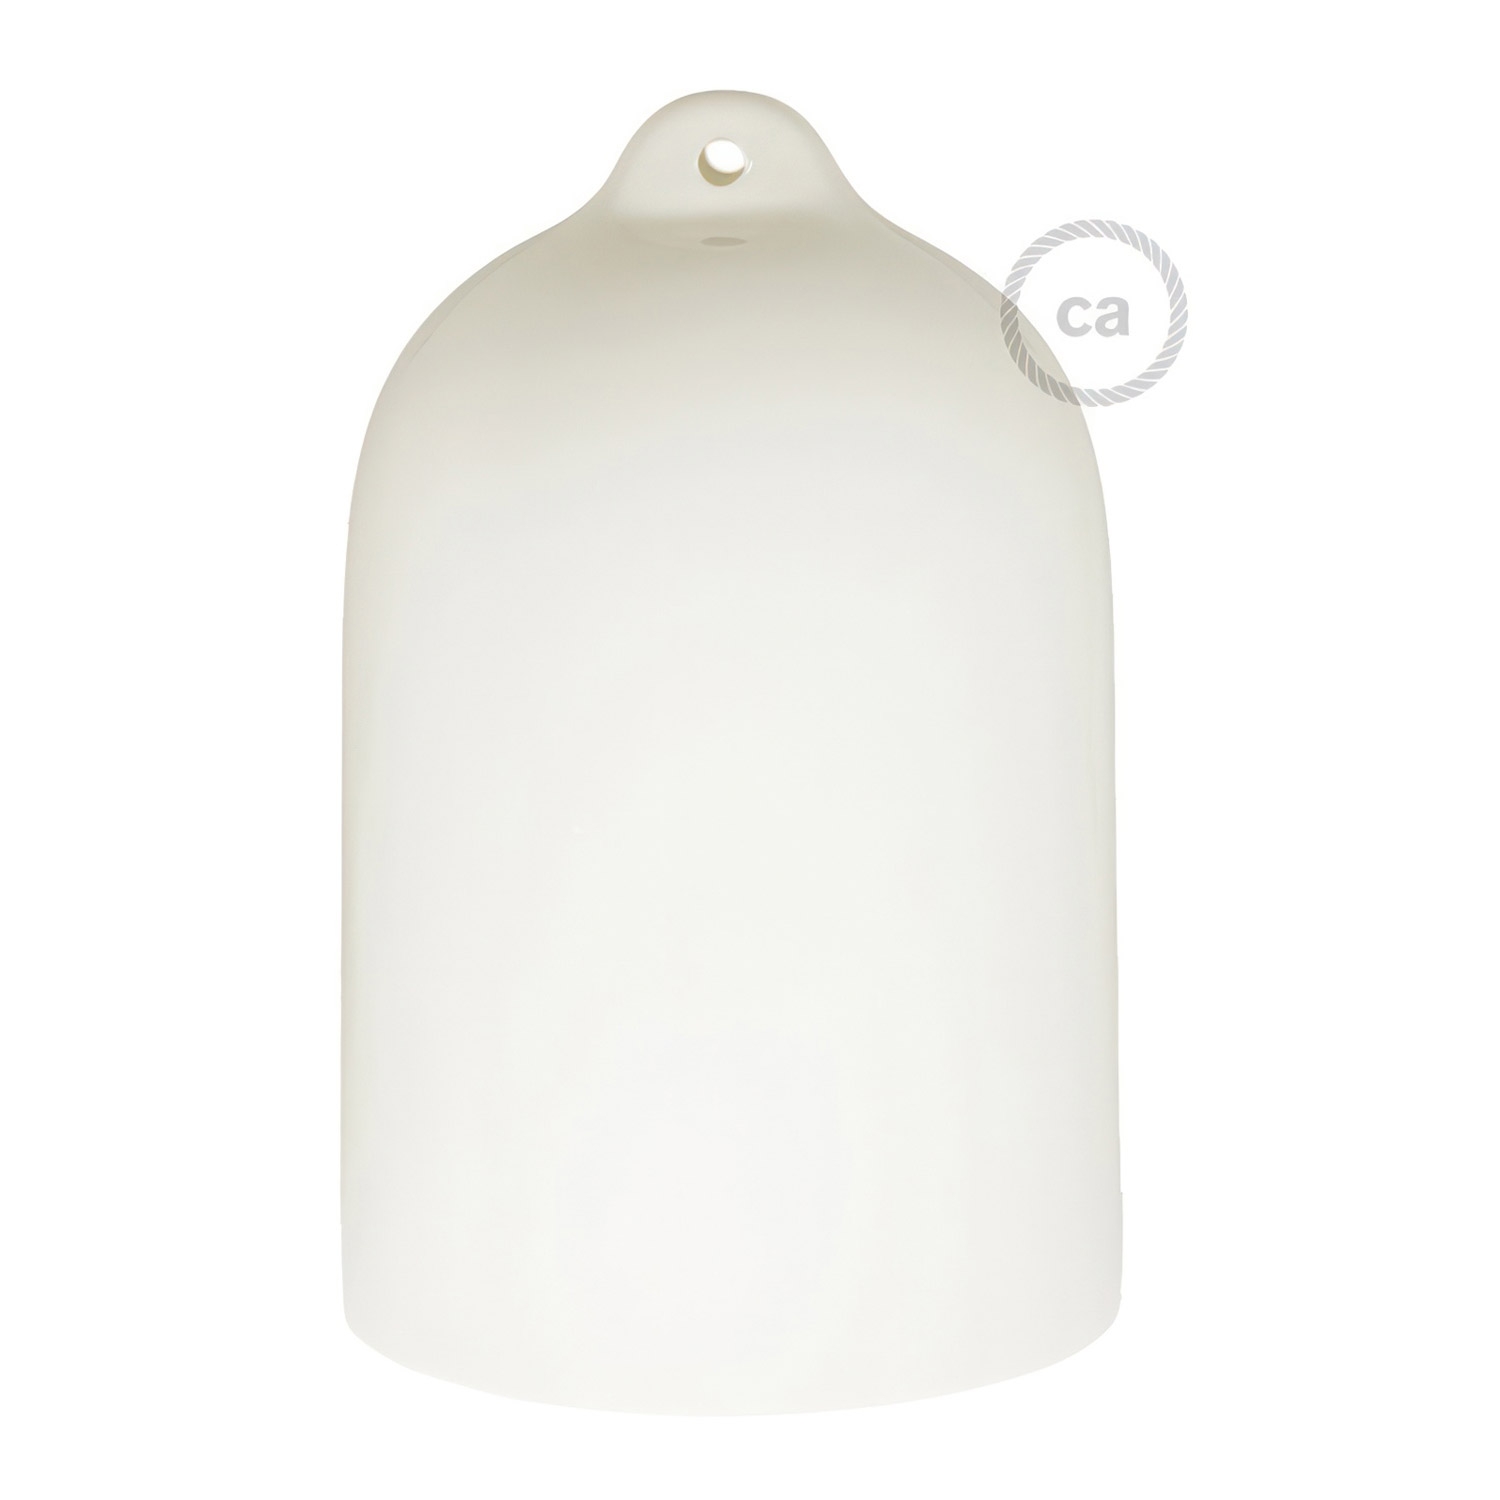 Bell XL ceramic lampshade for suspension - Made in Italy